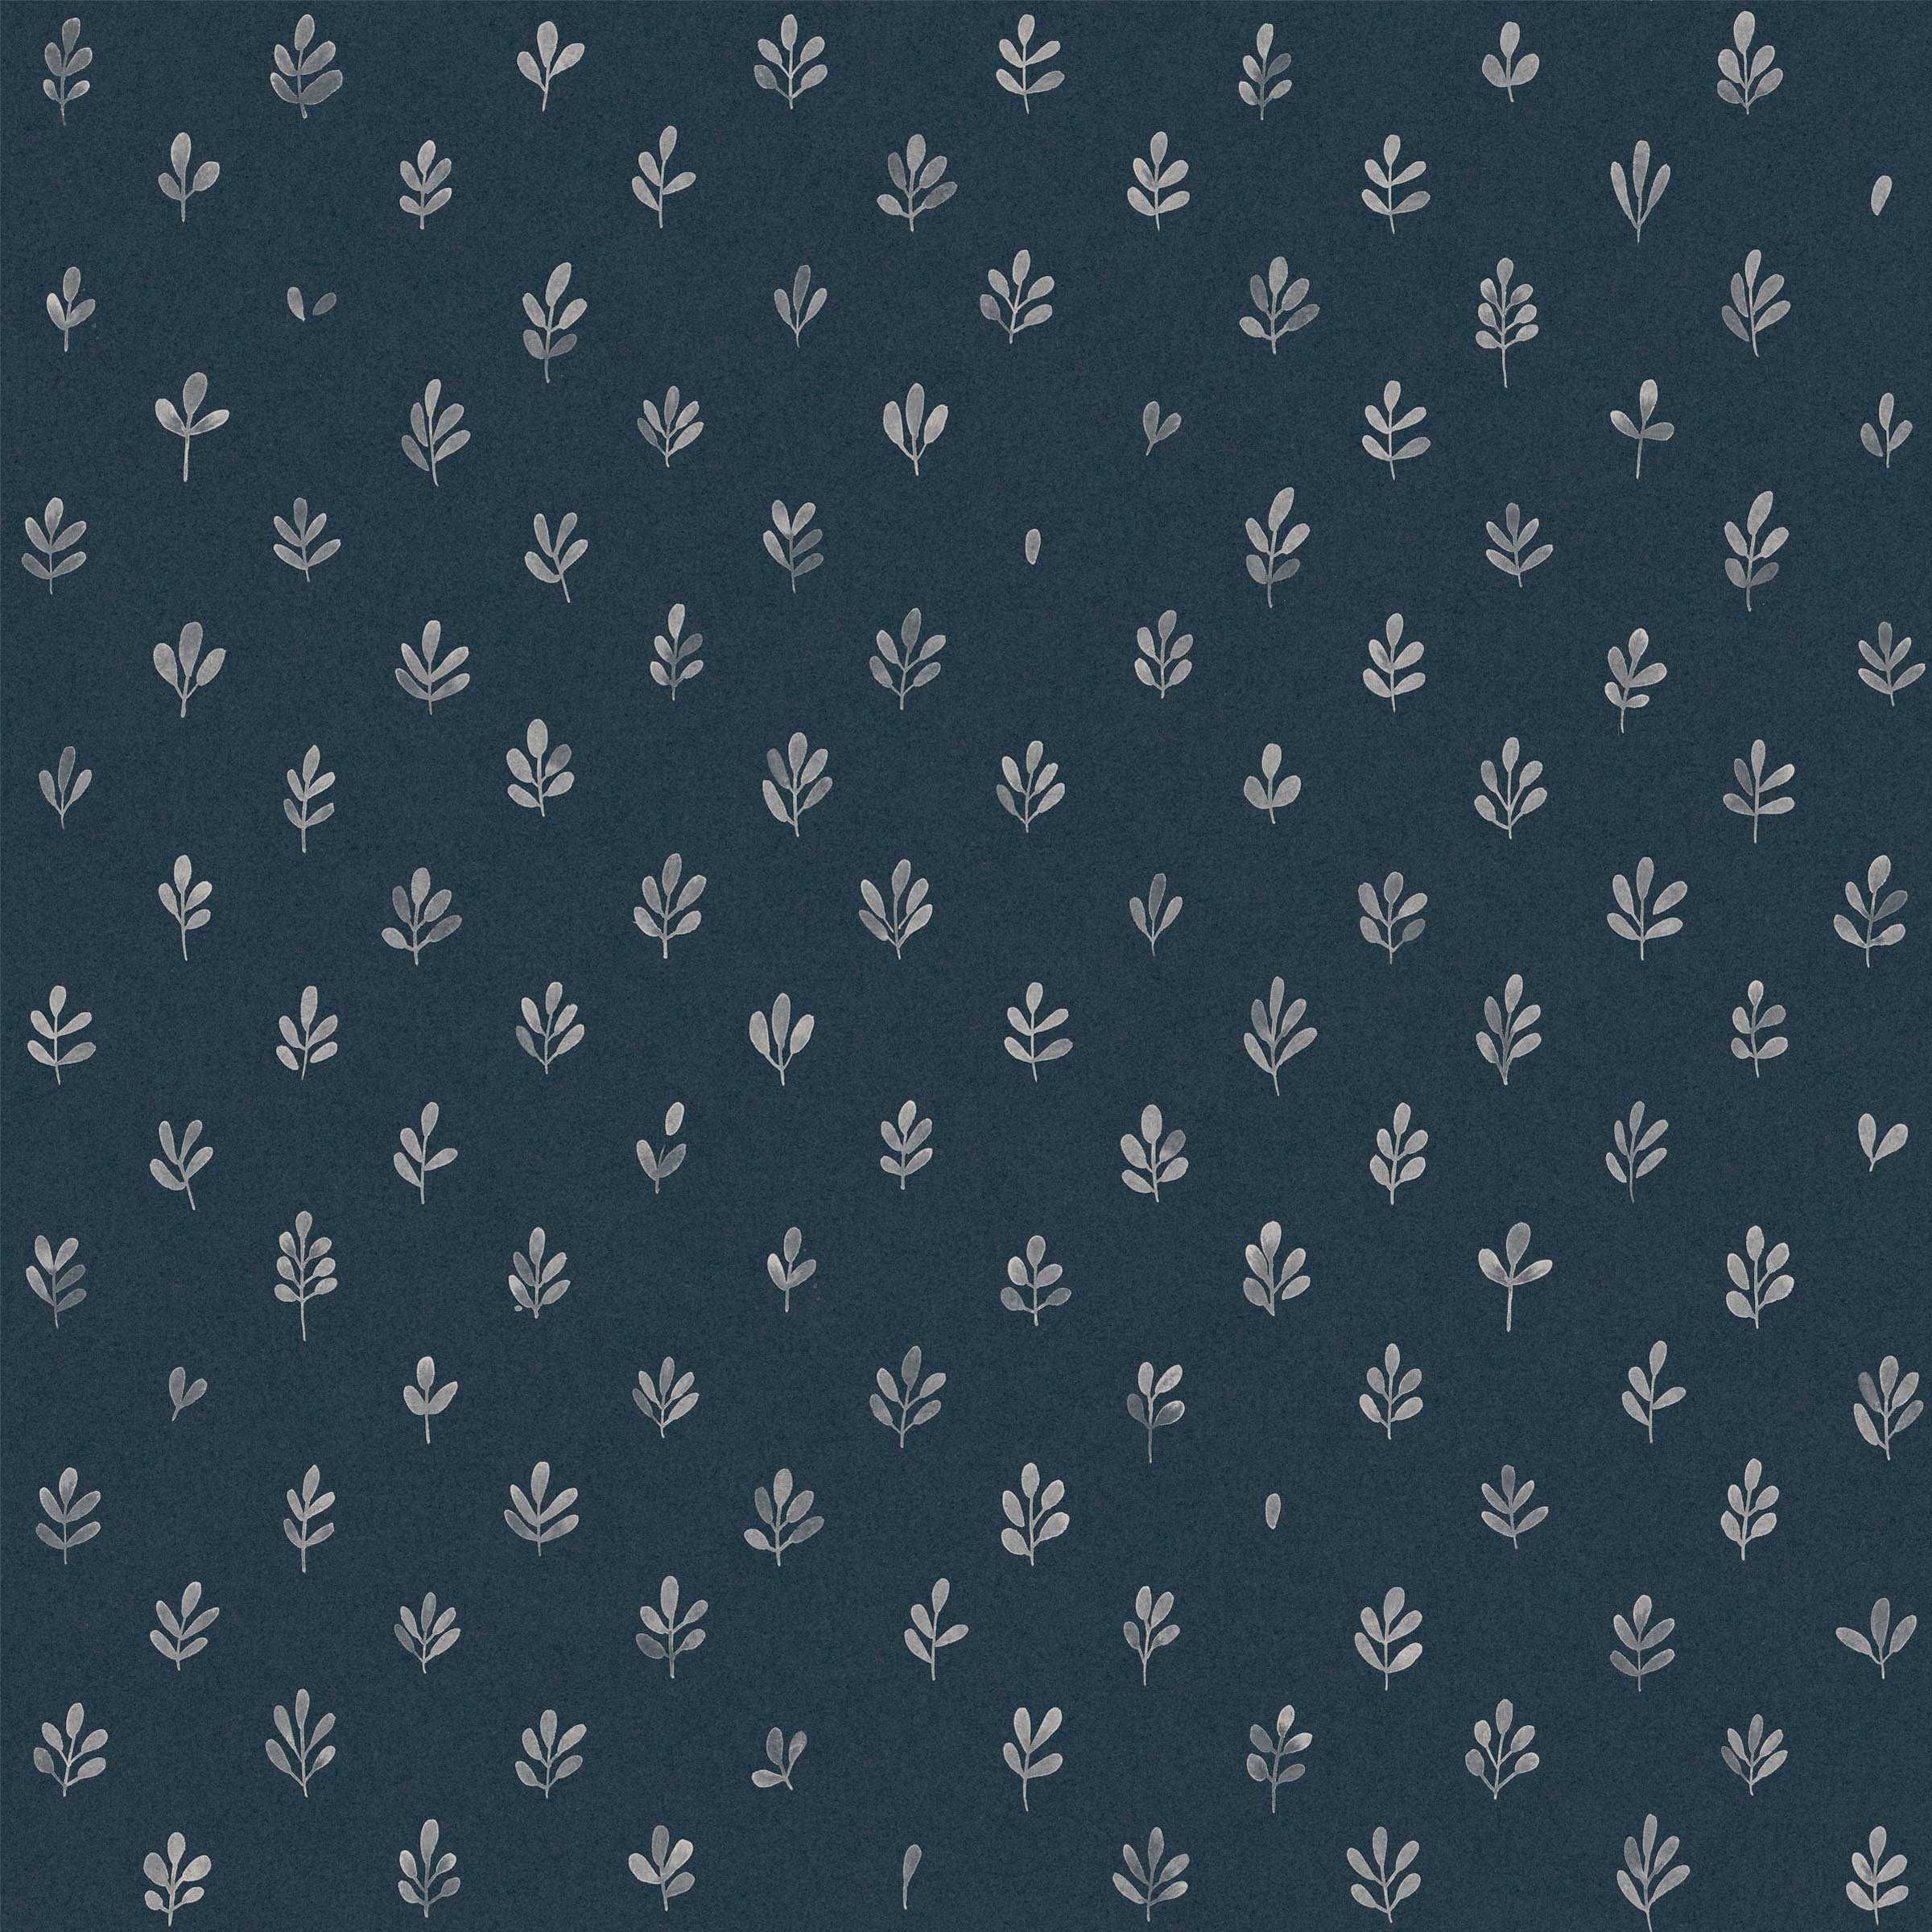 Detail of fabric in a repeating leaf print in cream on a navy field.